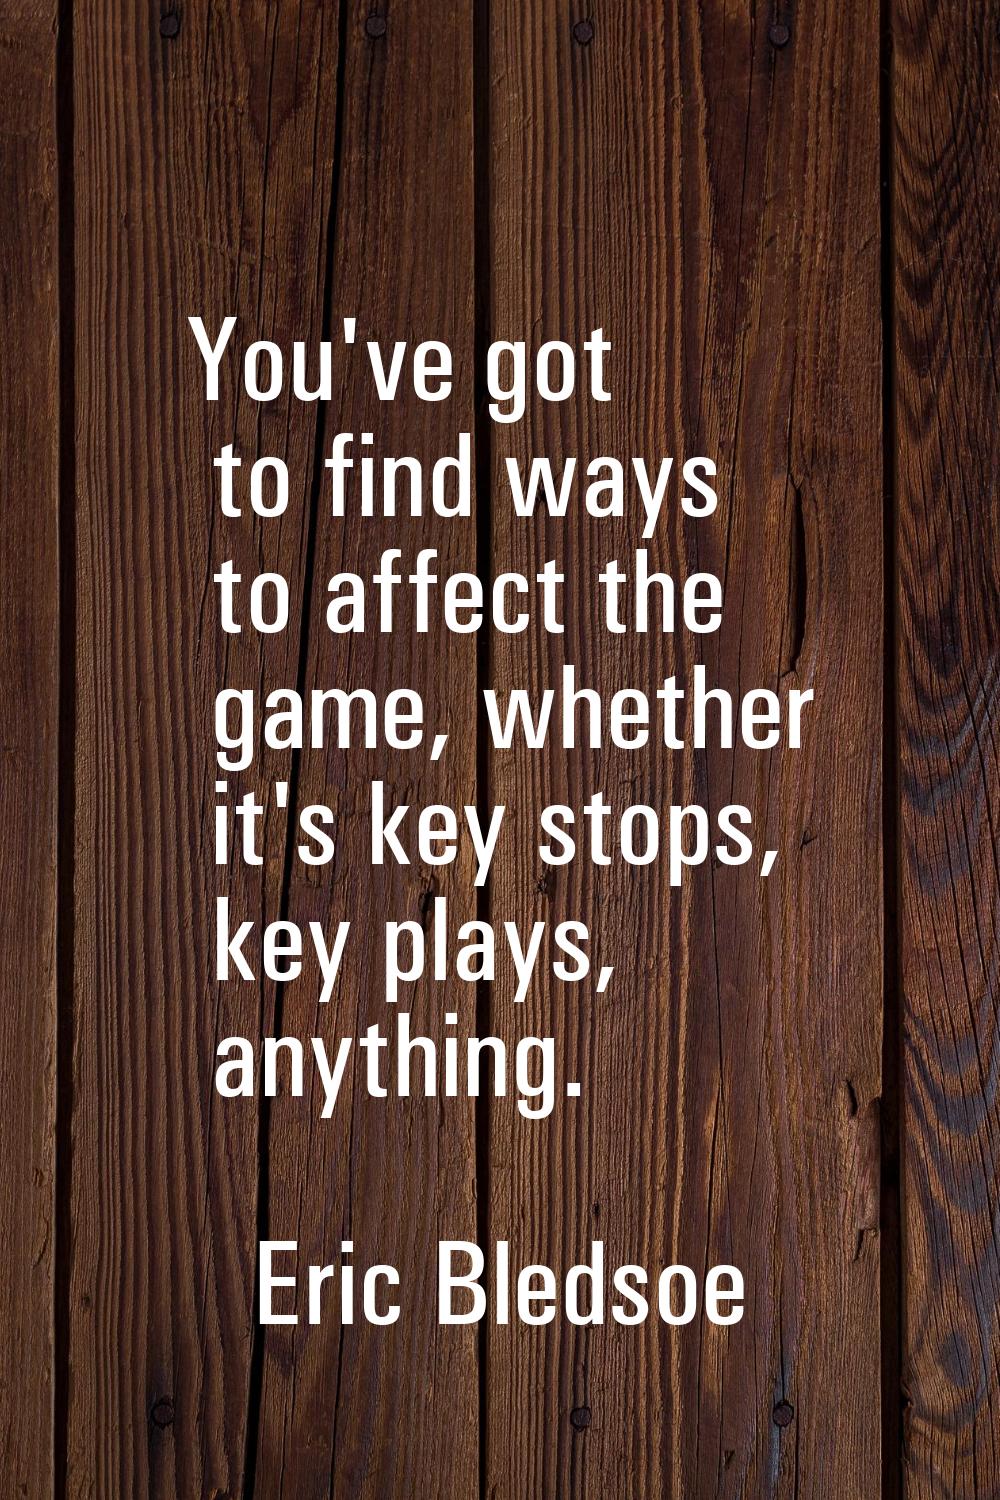 You've got to find ways to affect the game, whether it's key stops, key plays, anything.